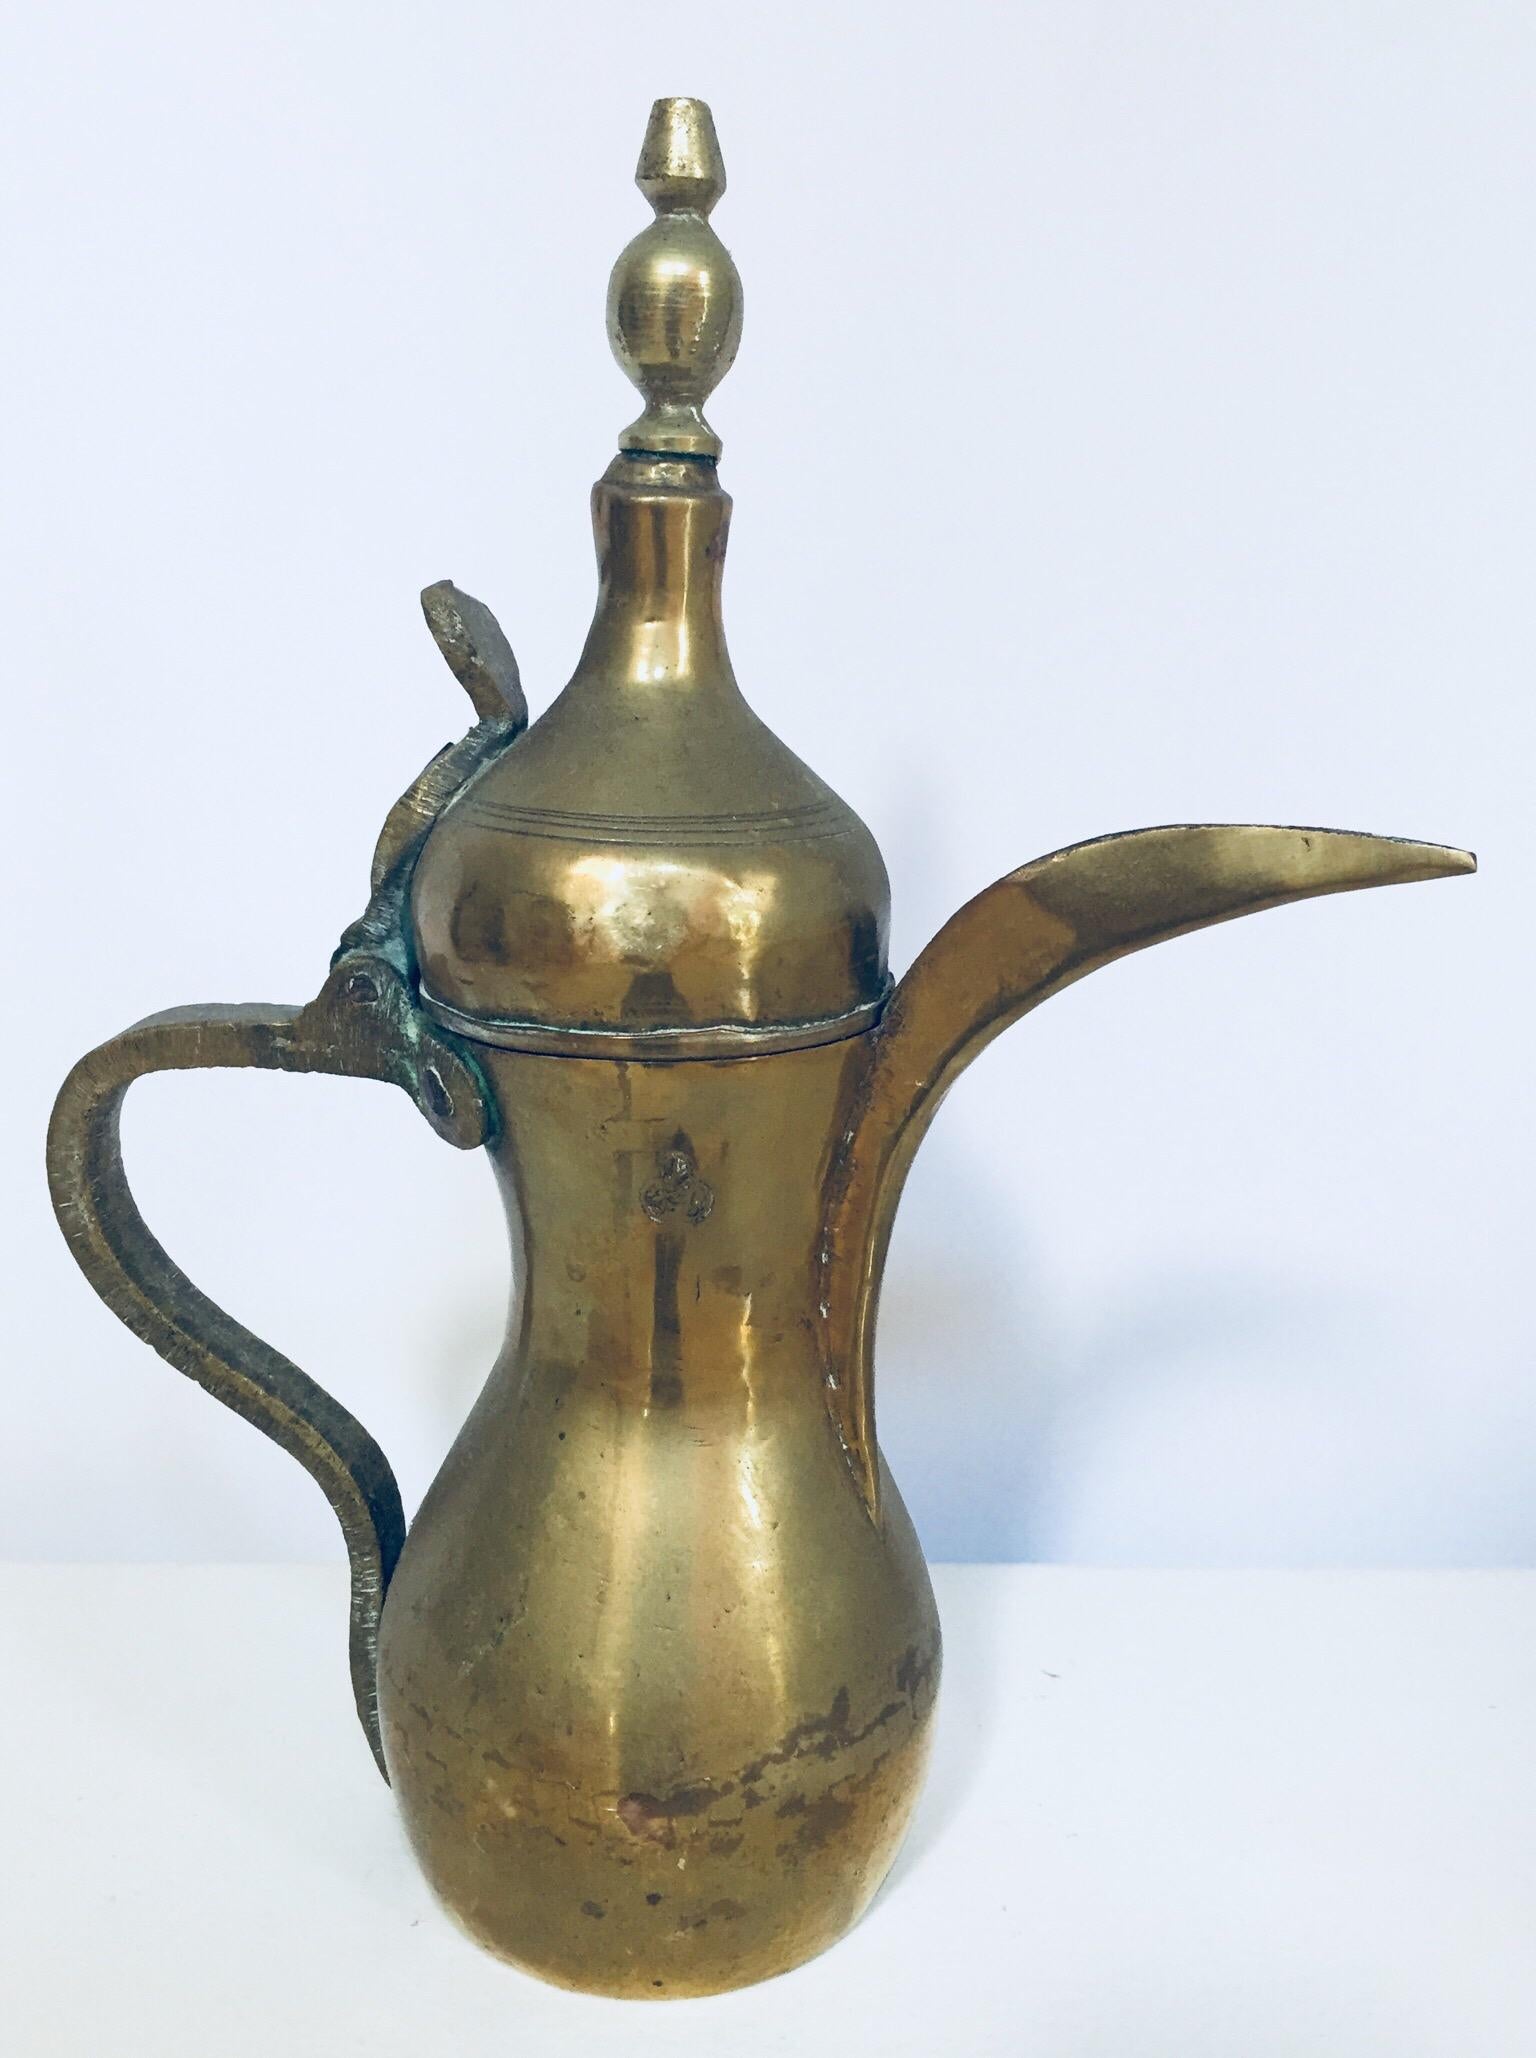 Middle Eastern traditional Arabian brass Dallah coffee pot. 
Coffee pot hand-hammered and chased brass with riveted brass finish and a very large spout. 
Size: 10